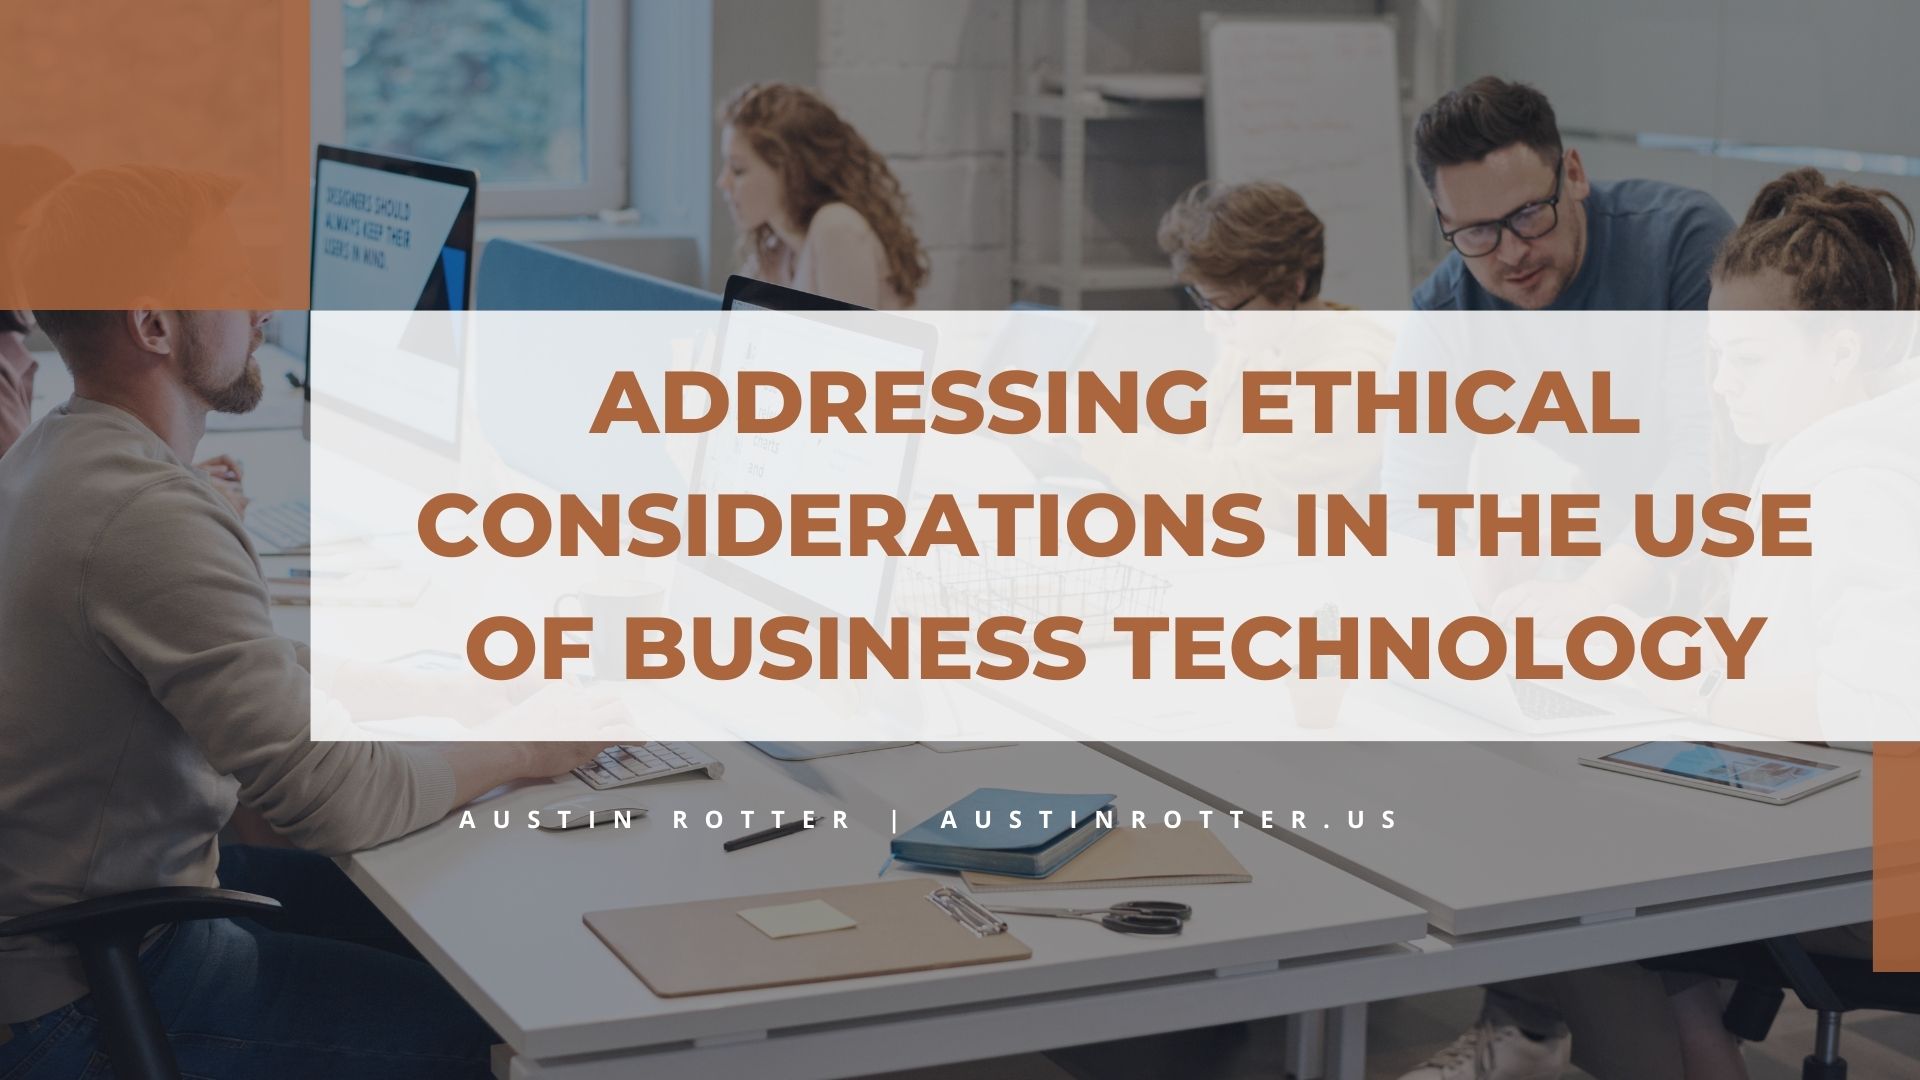 ADDRESSING ETHICAL
CONSIDERATIONS IN THE USE

OF BUSINESS TECHNOLOGY